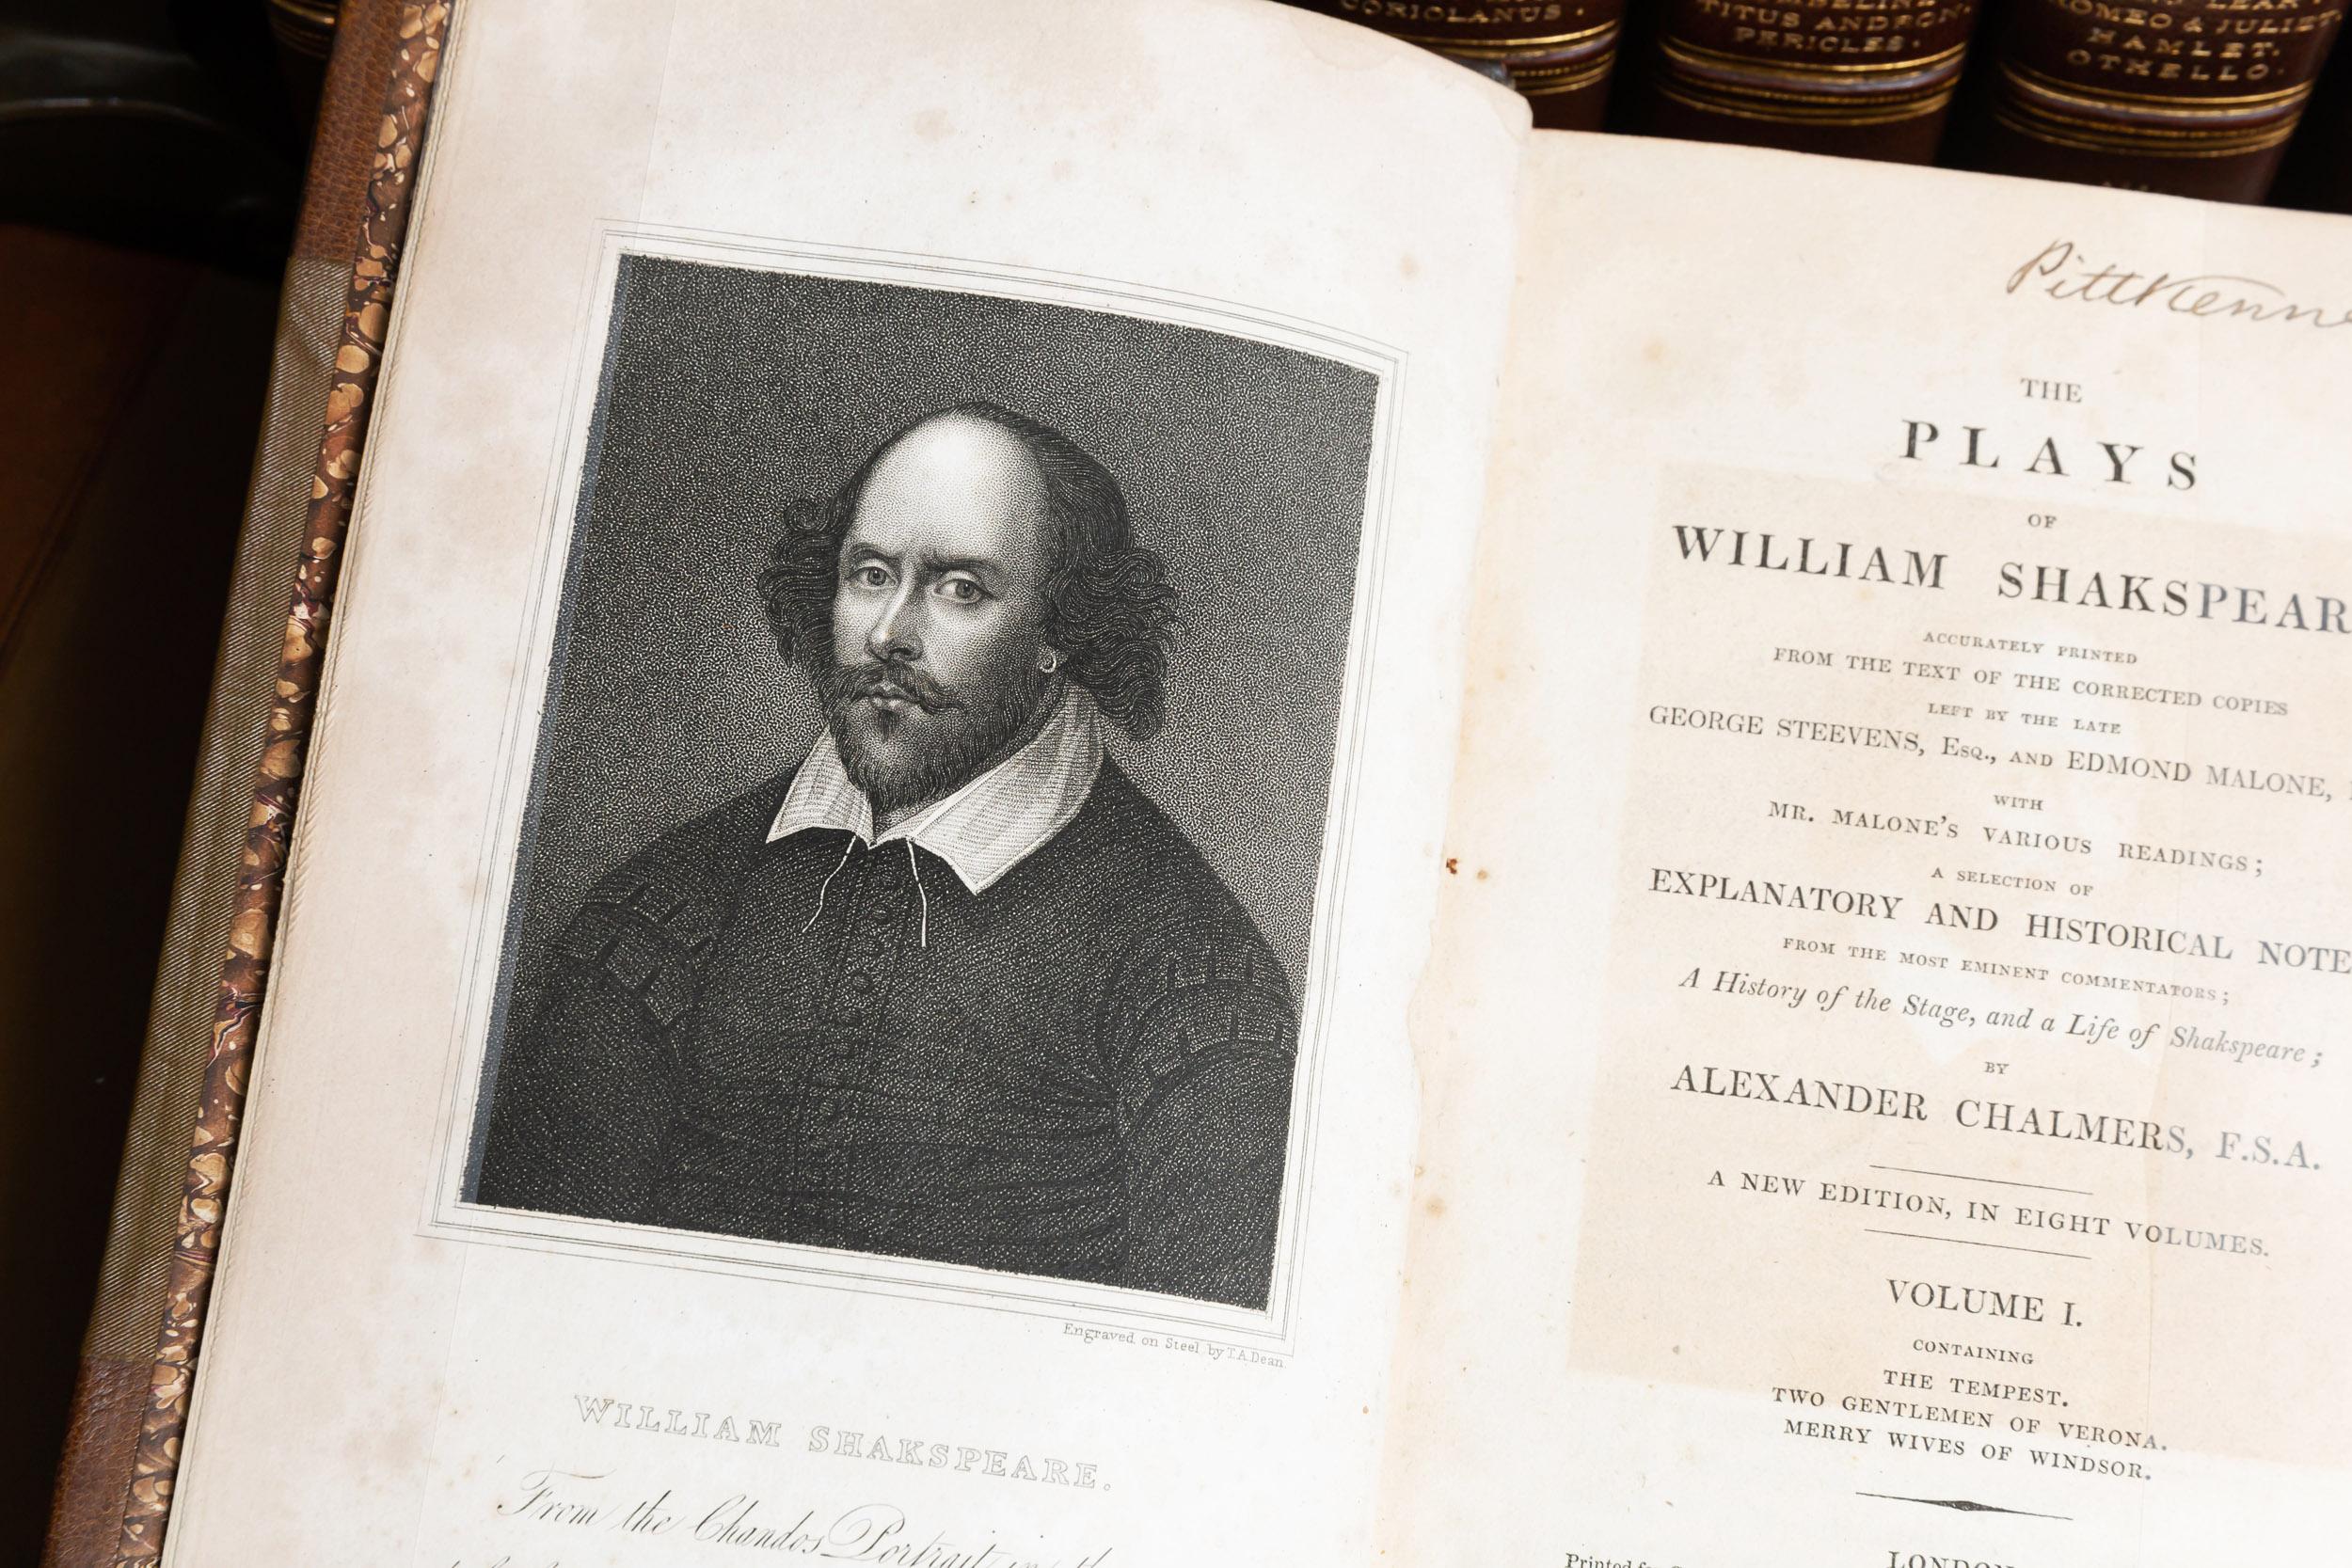 William Shakespeare. The Plays. A History Of The Stage, And A Life of Shakespeare
By Alexander Chalmers

9 volumes

Bound in 3/4 brown Morocco, cloth boards, marbled edges, raised bands, gilt panels, marbled endpapers,